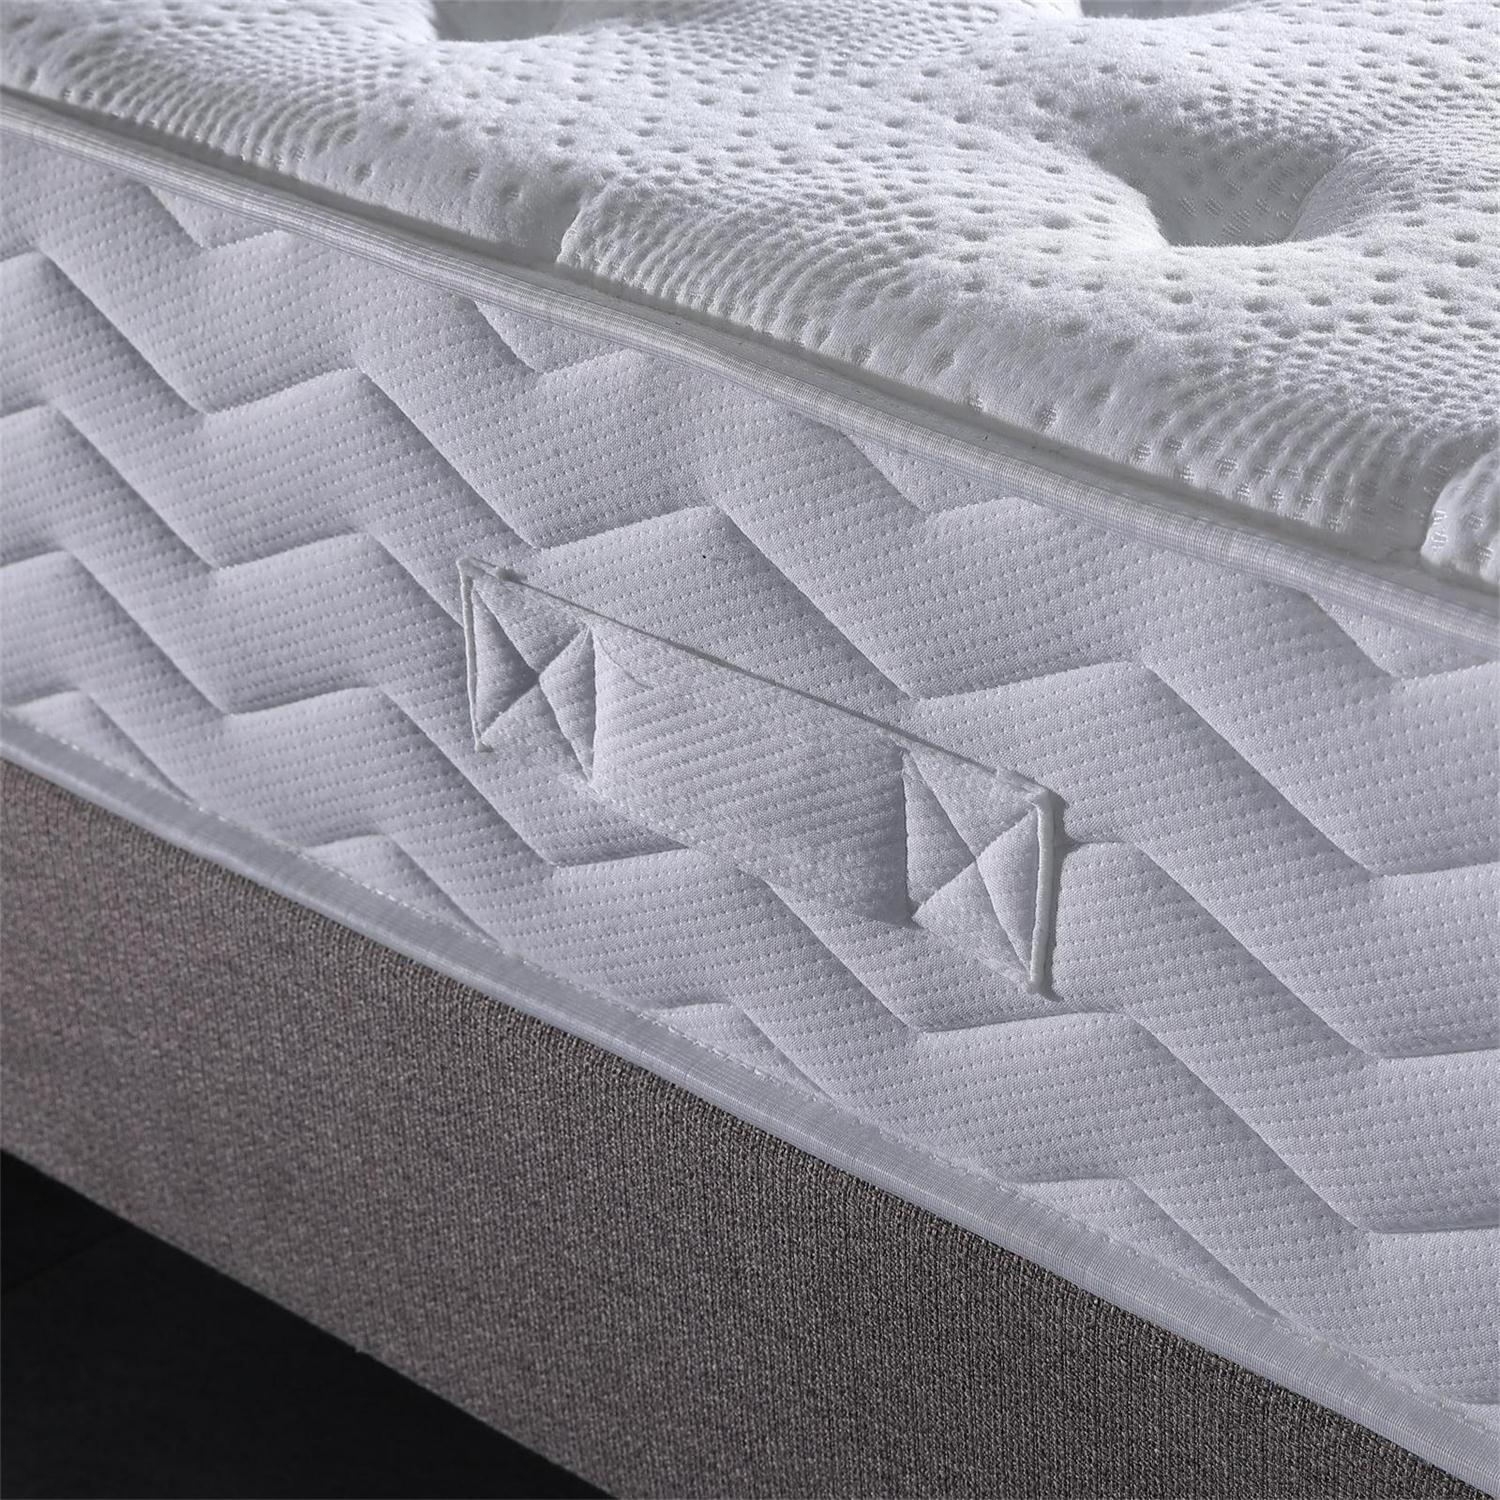 Fansace 21BA-02 Hotel Full-Size Mattress With Tight Top Design Compressed